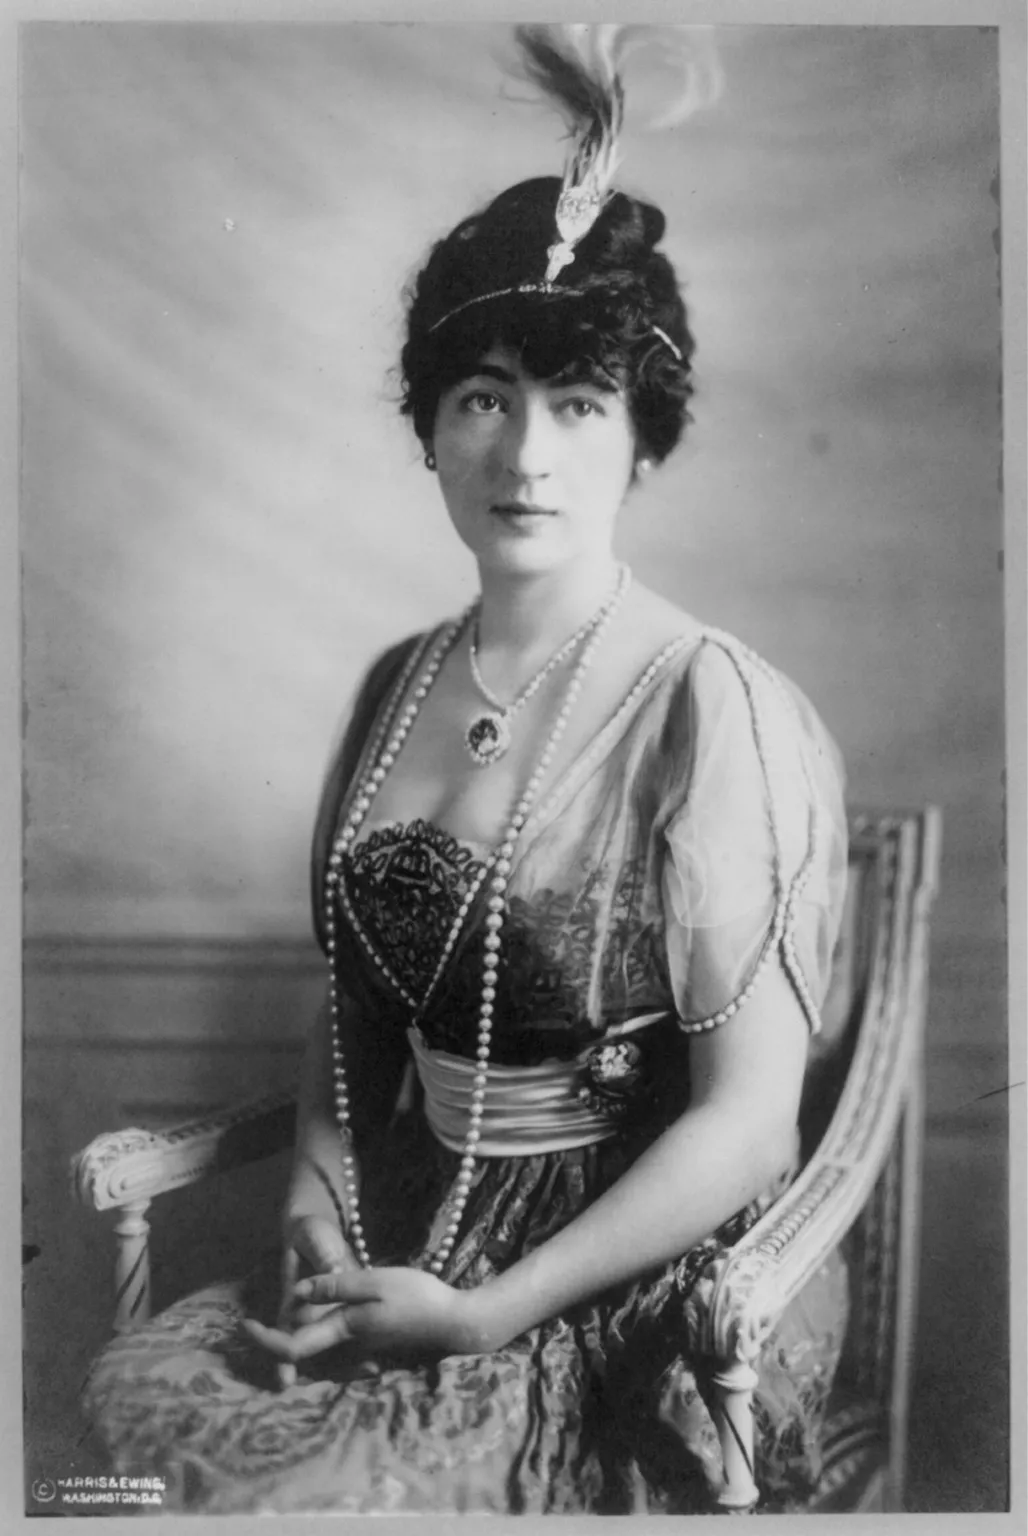 A light-skinned woman with dark hair wearing pearls and the Hope Diamond